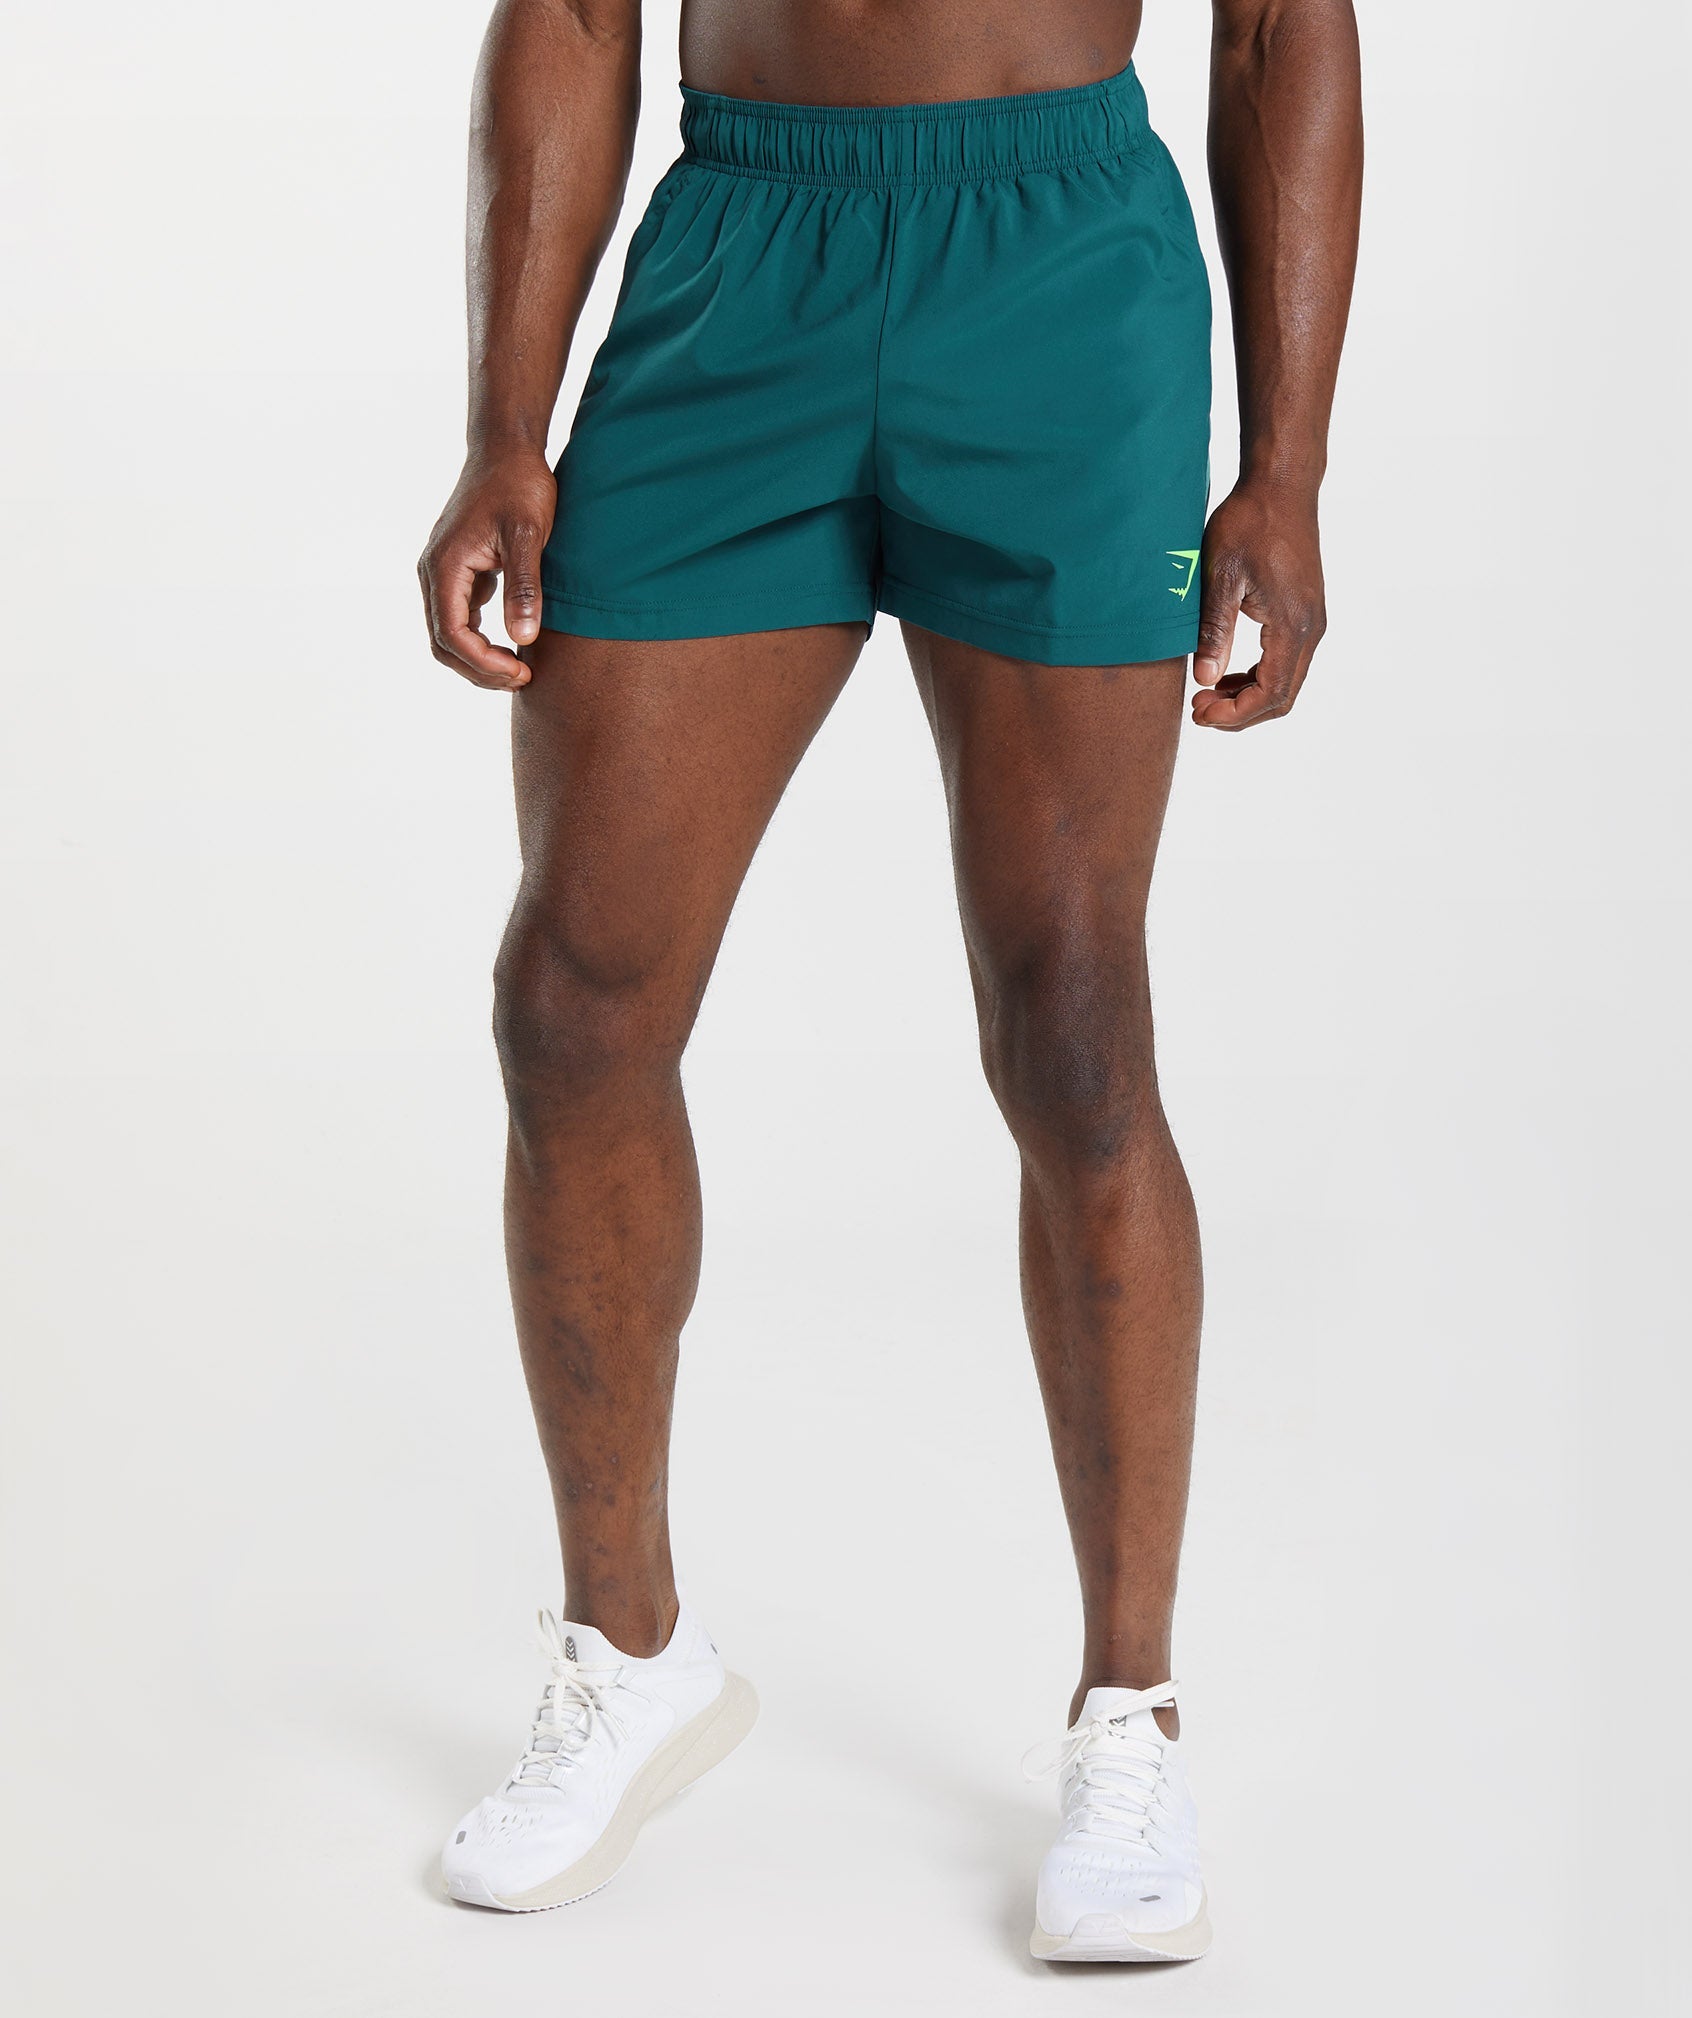 Sport 5" Shorts in Winter Teal/Slate Blue - view 1